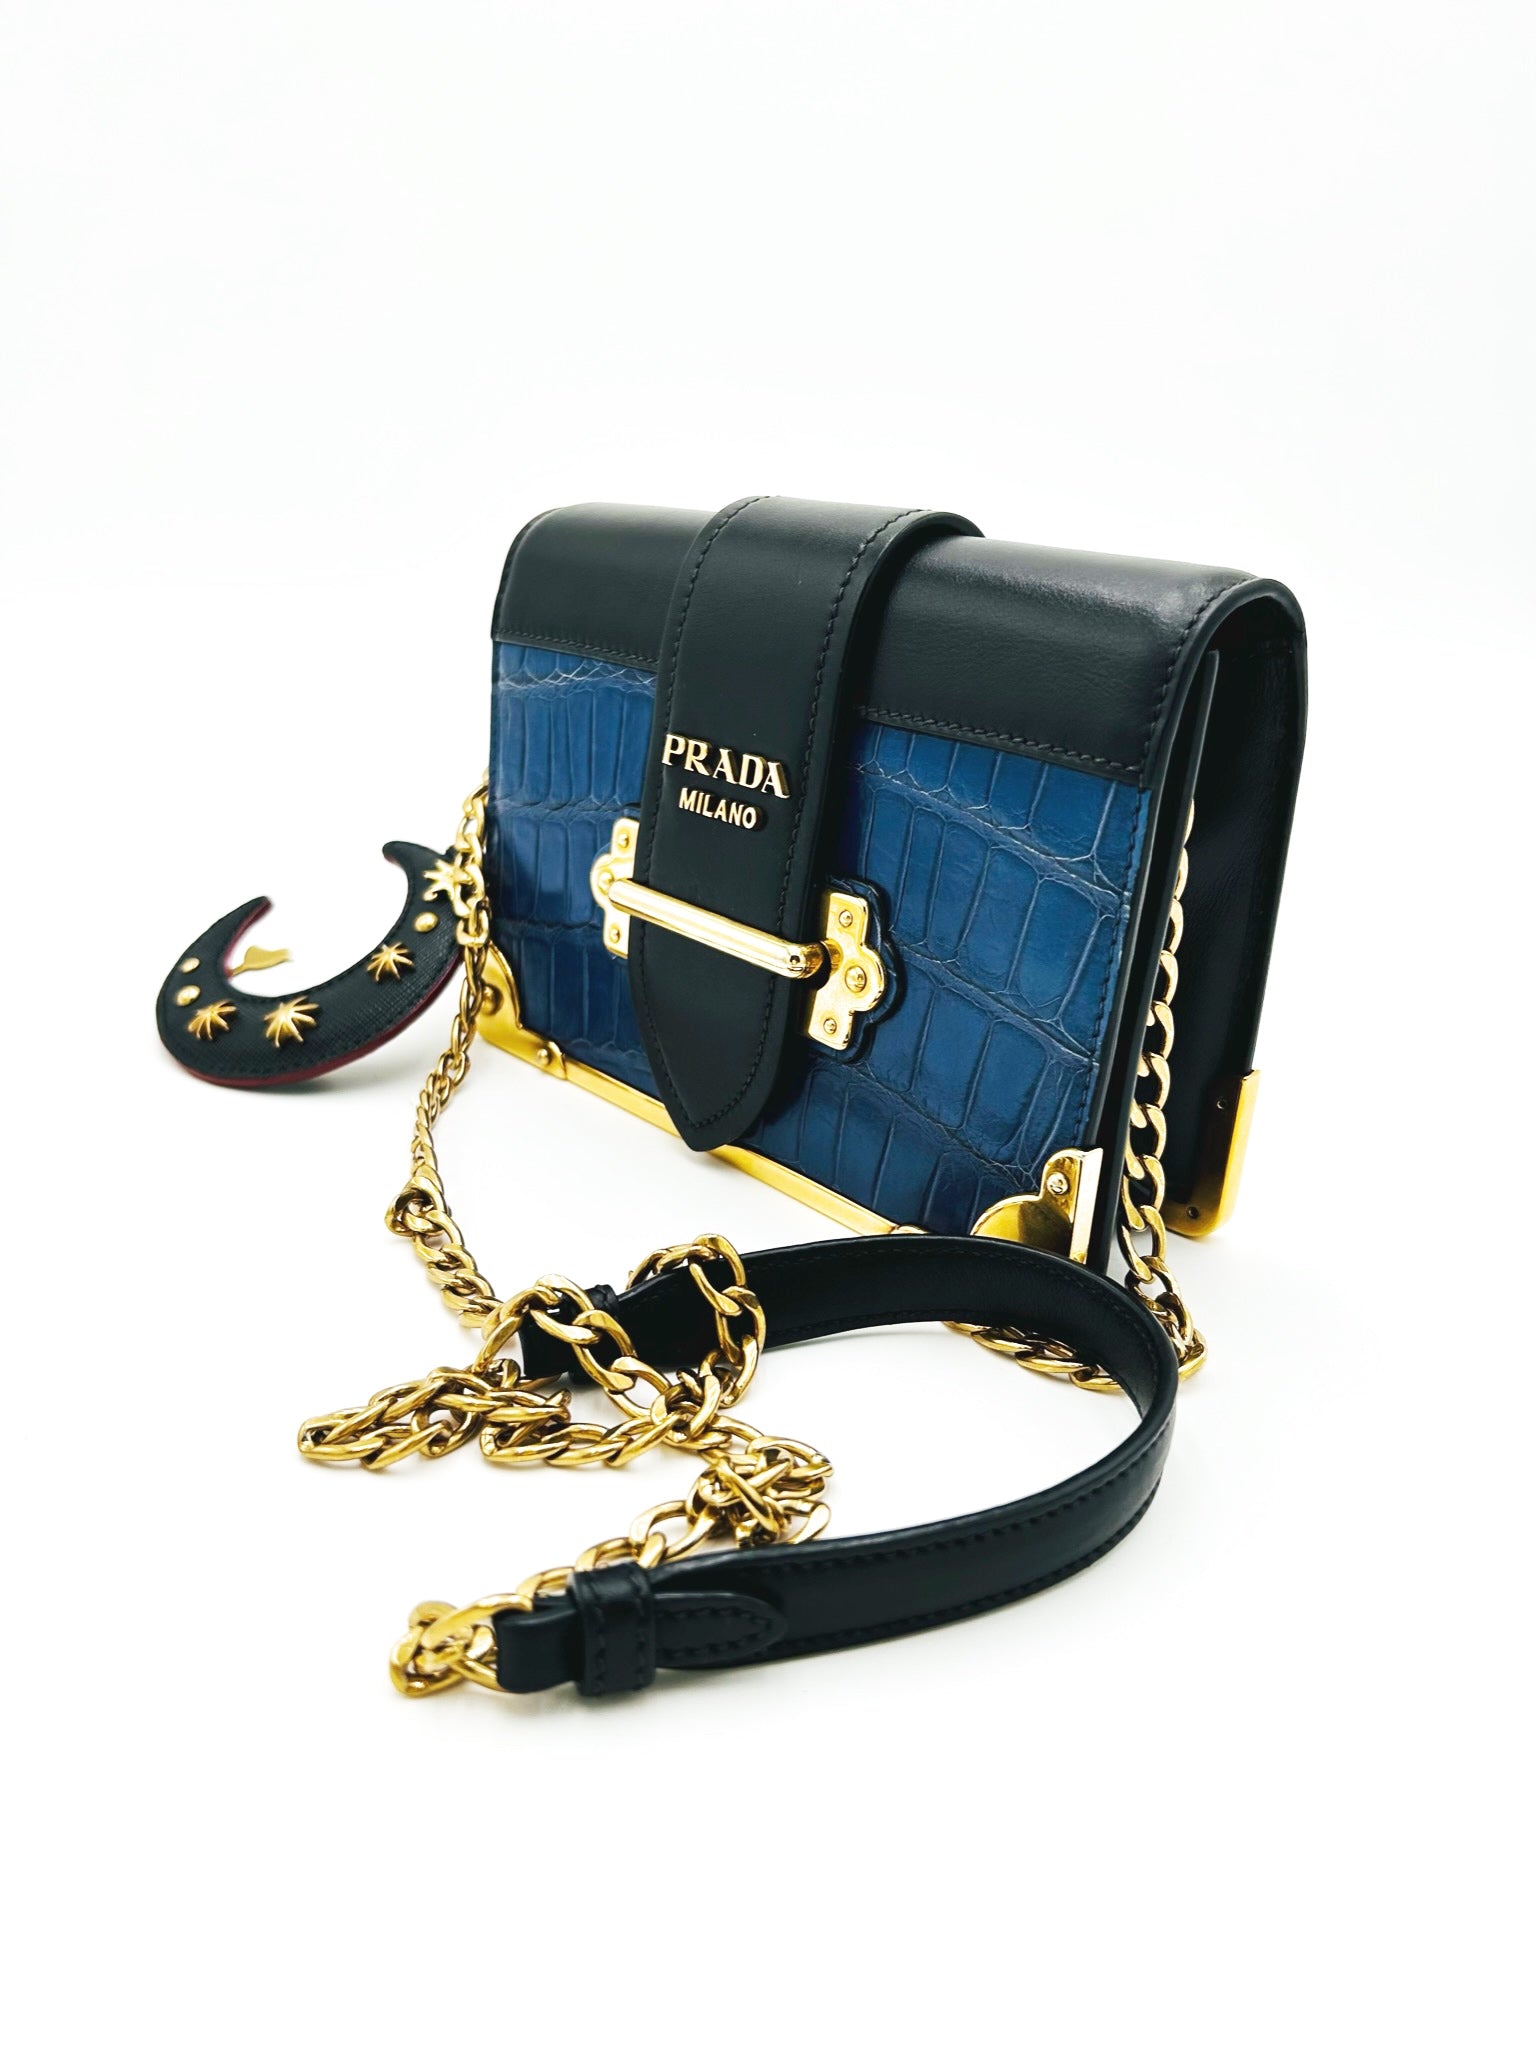 PRADA SPECIAL EDITION CAHIER LEATHER SHOULDER BAG WITH MOON CHARM